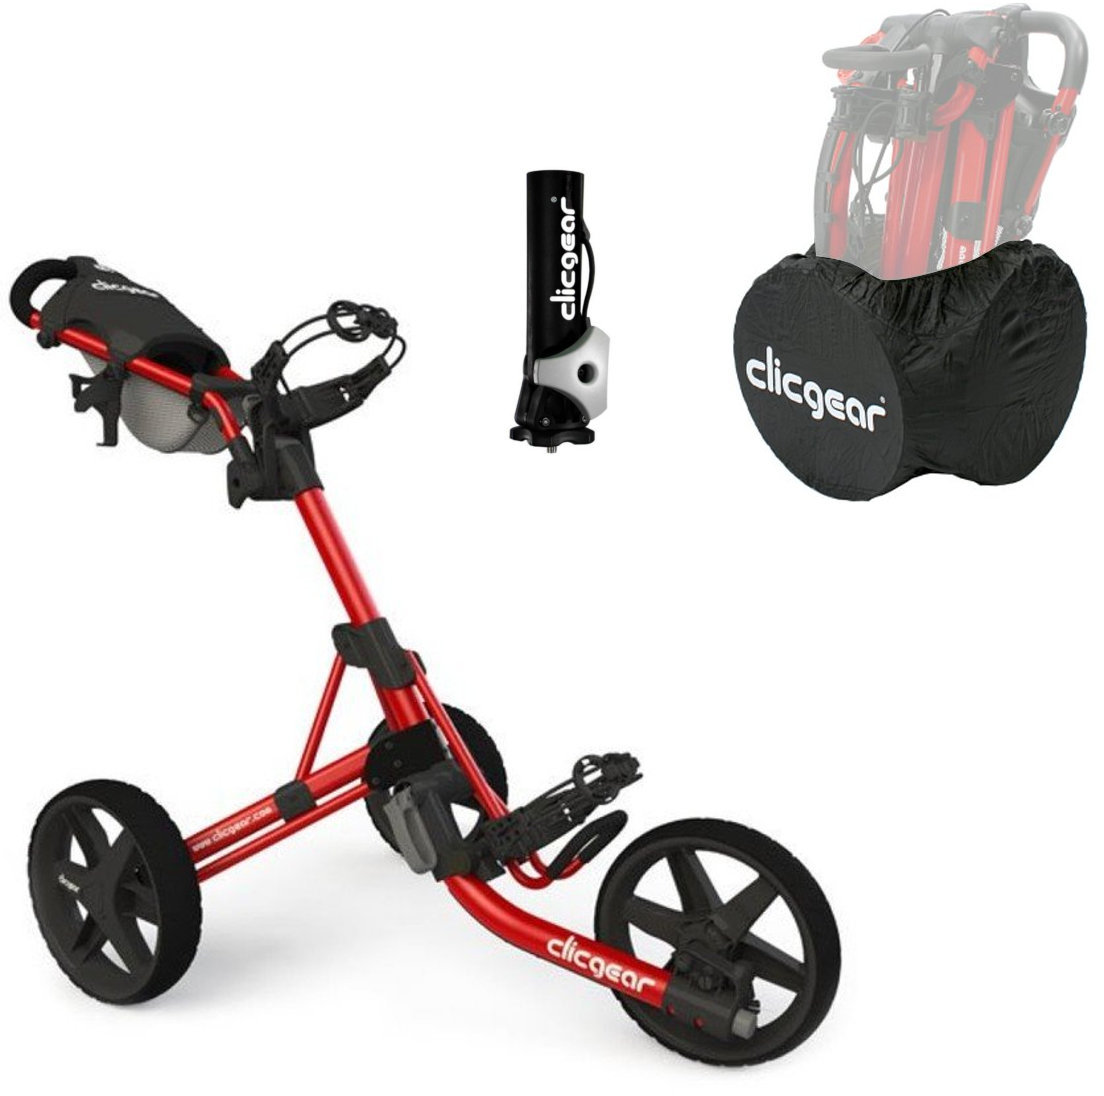 Pushtrolley Clicgear 3.5+ Red/Black DELUXE SET Pushtrolley